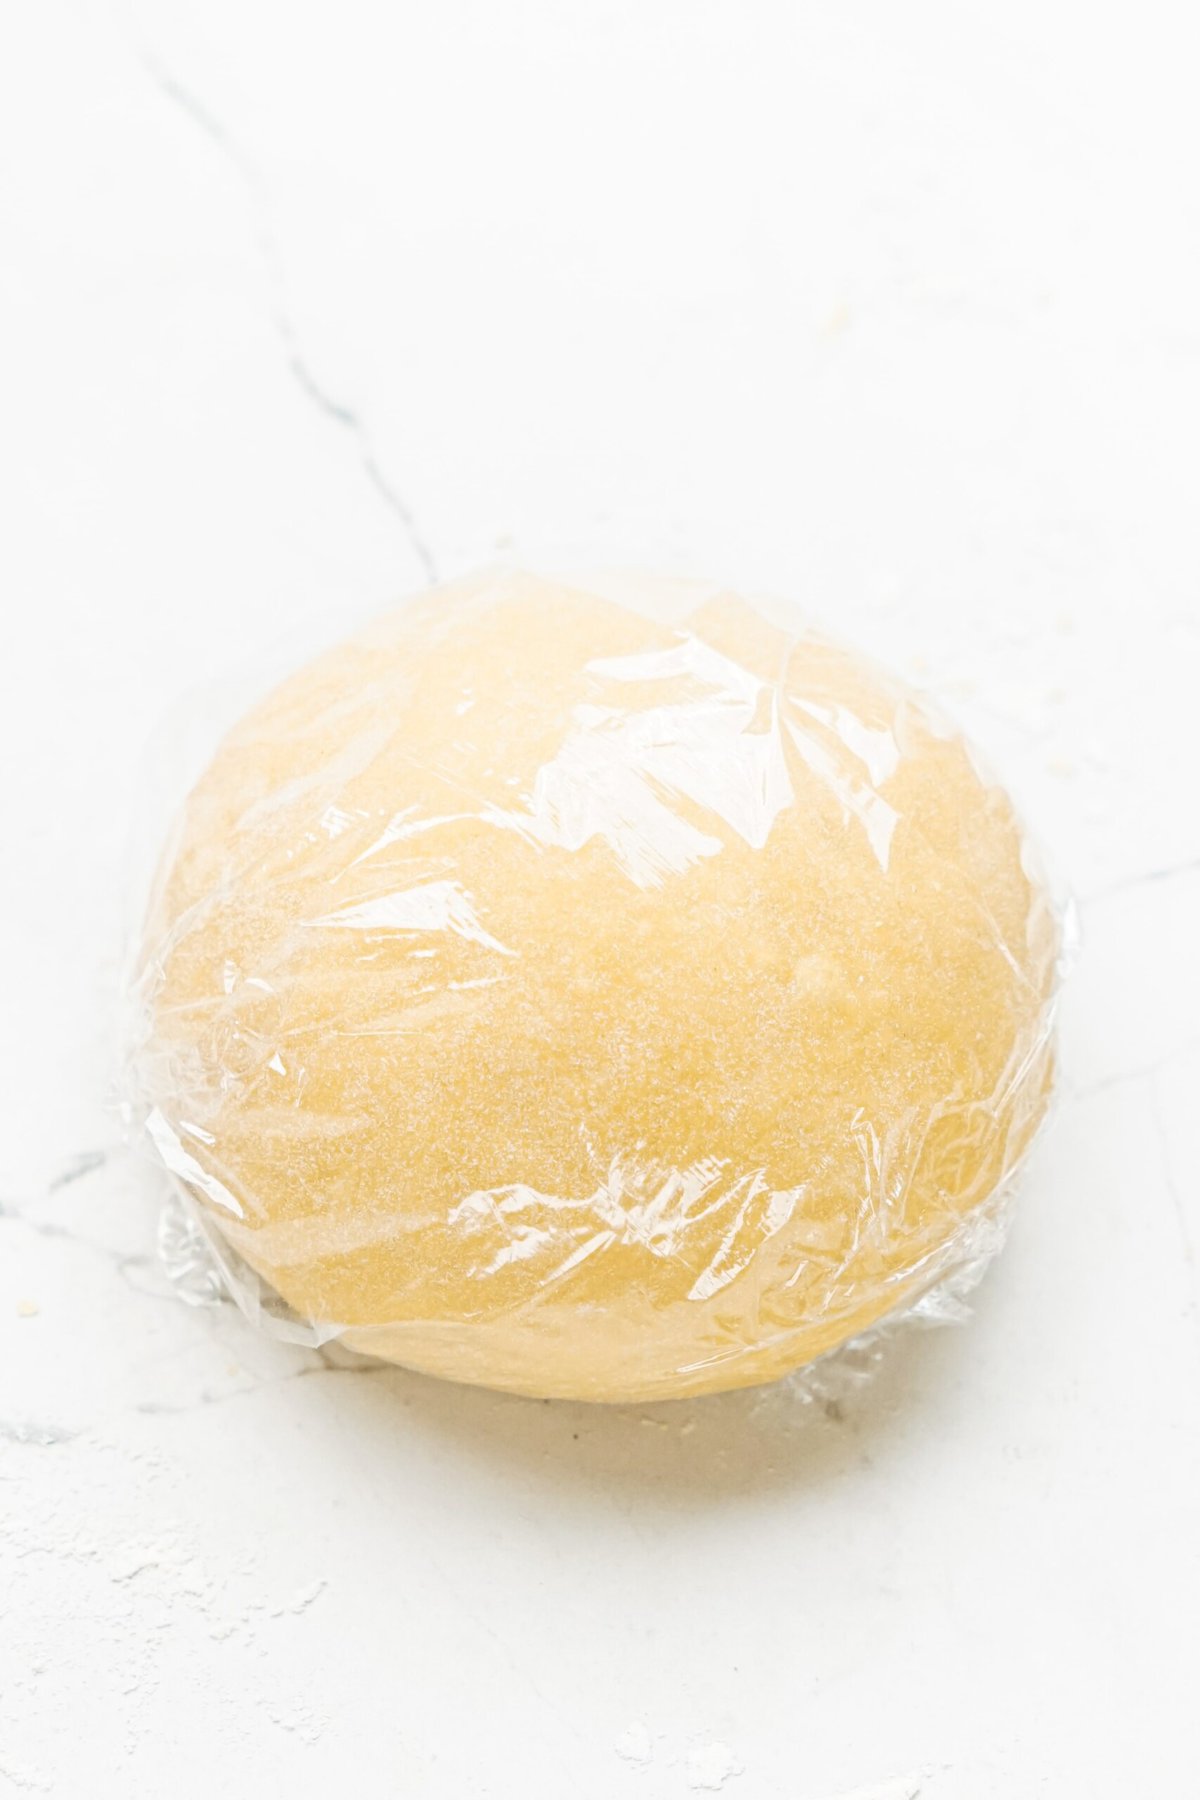 A ball of dough wrapped in plastic on a white surface.